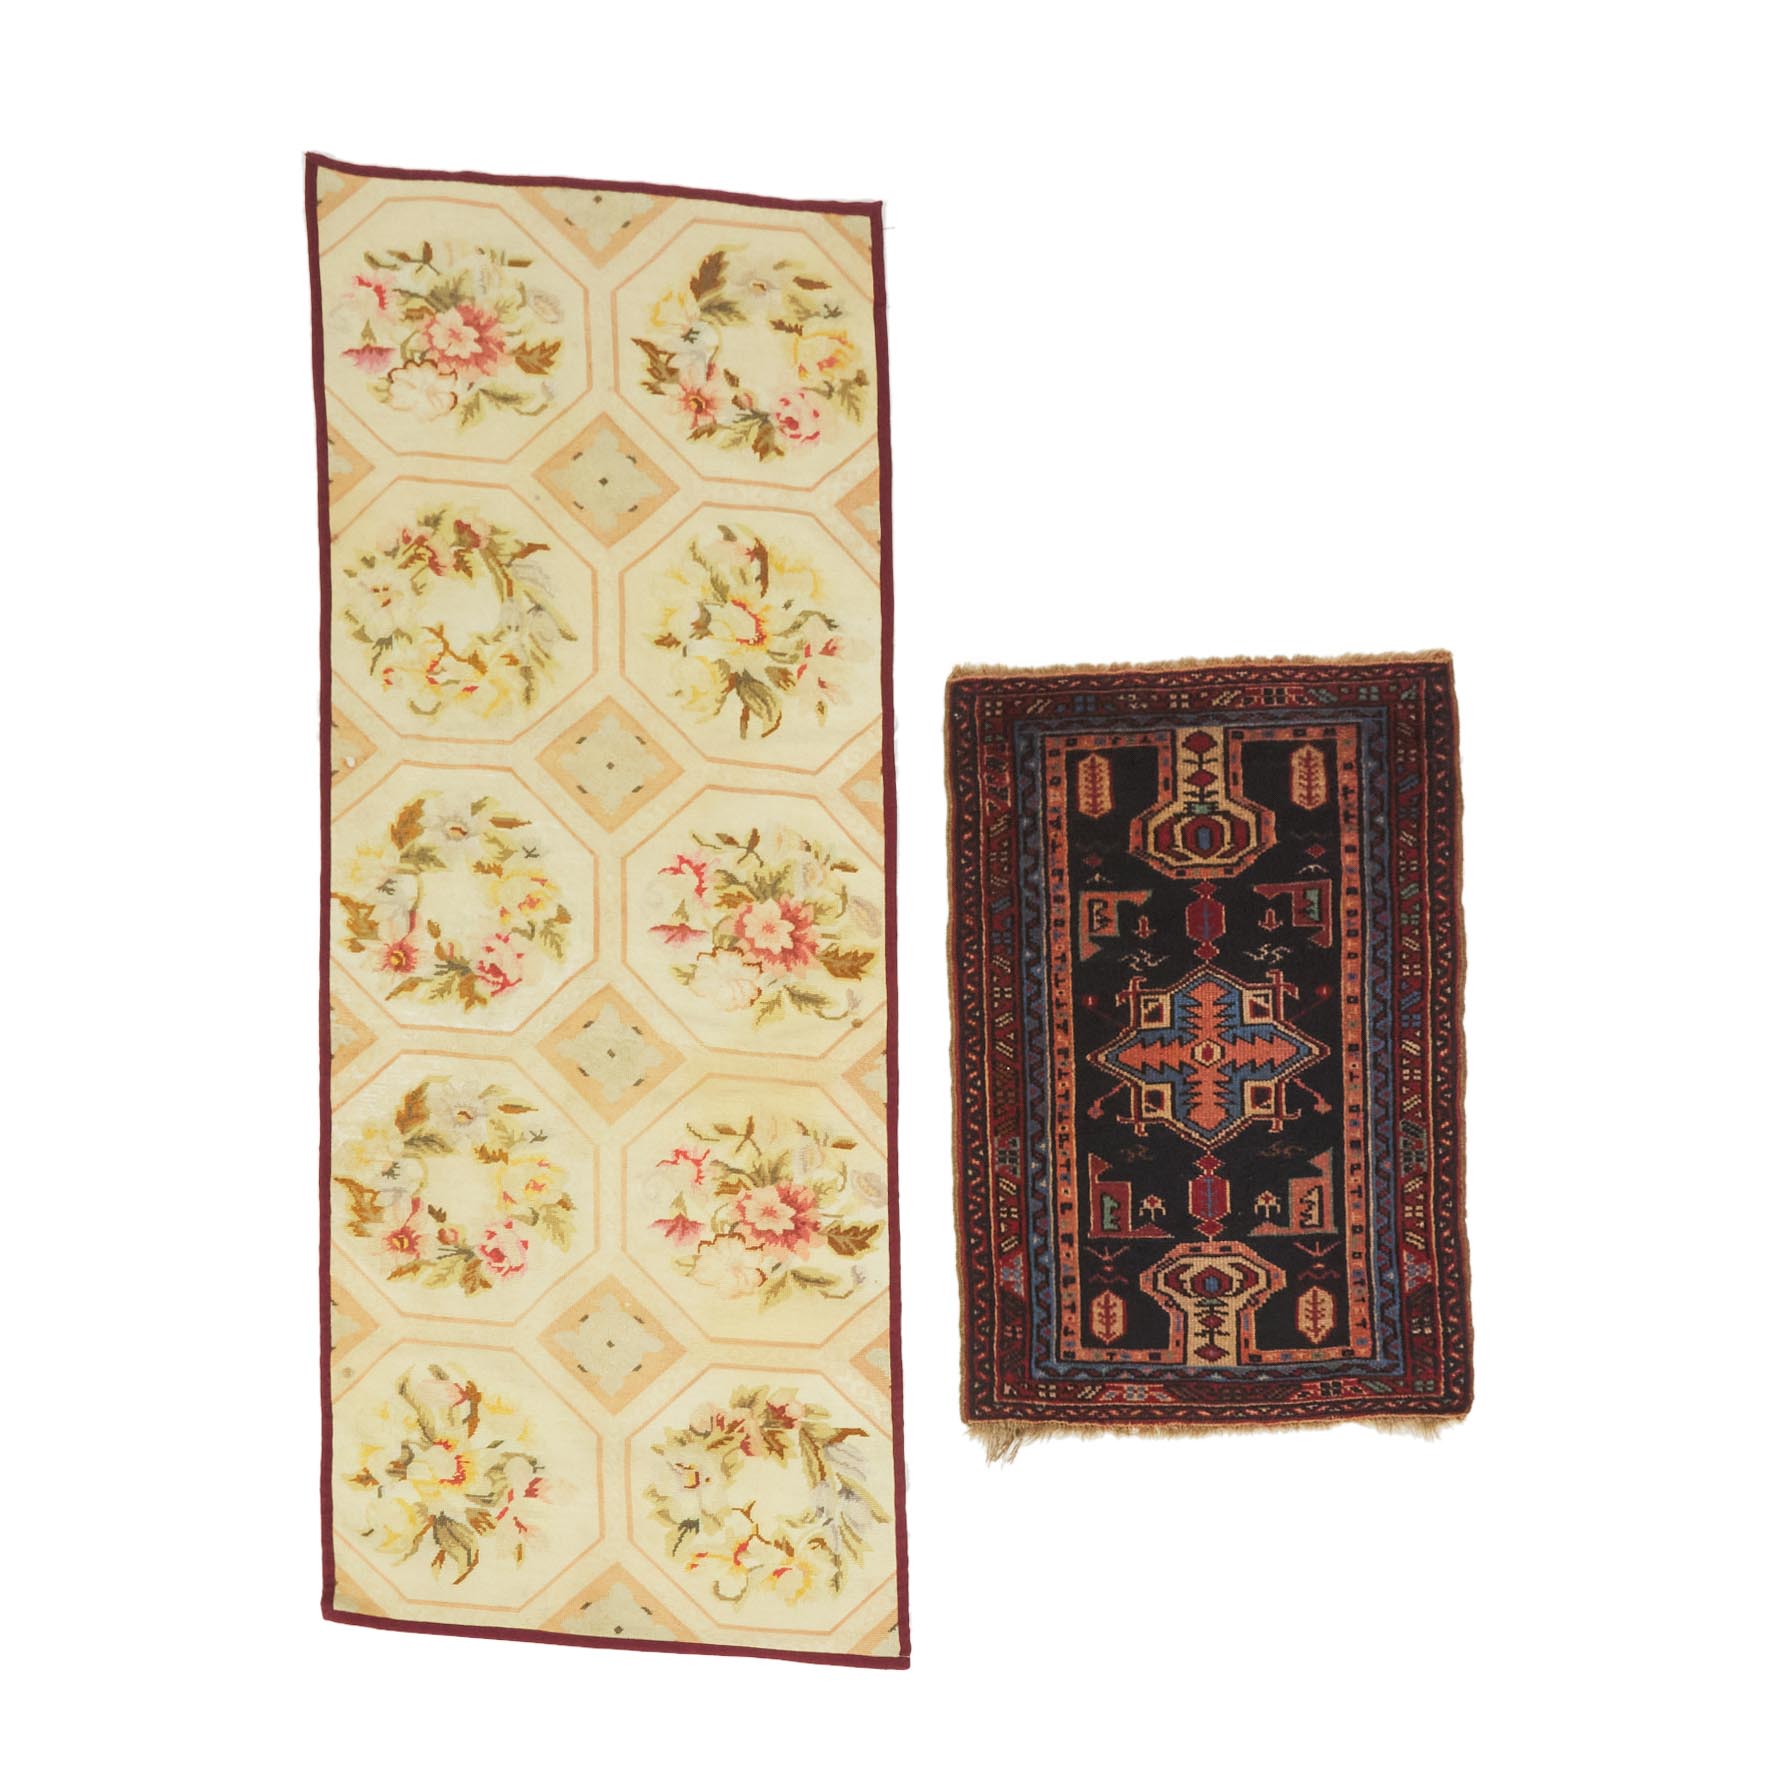 Turkish Bergama Mat, c.1920 together with a Aubusson Needlepoint Fragment, c.1960